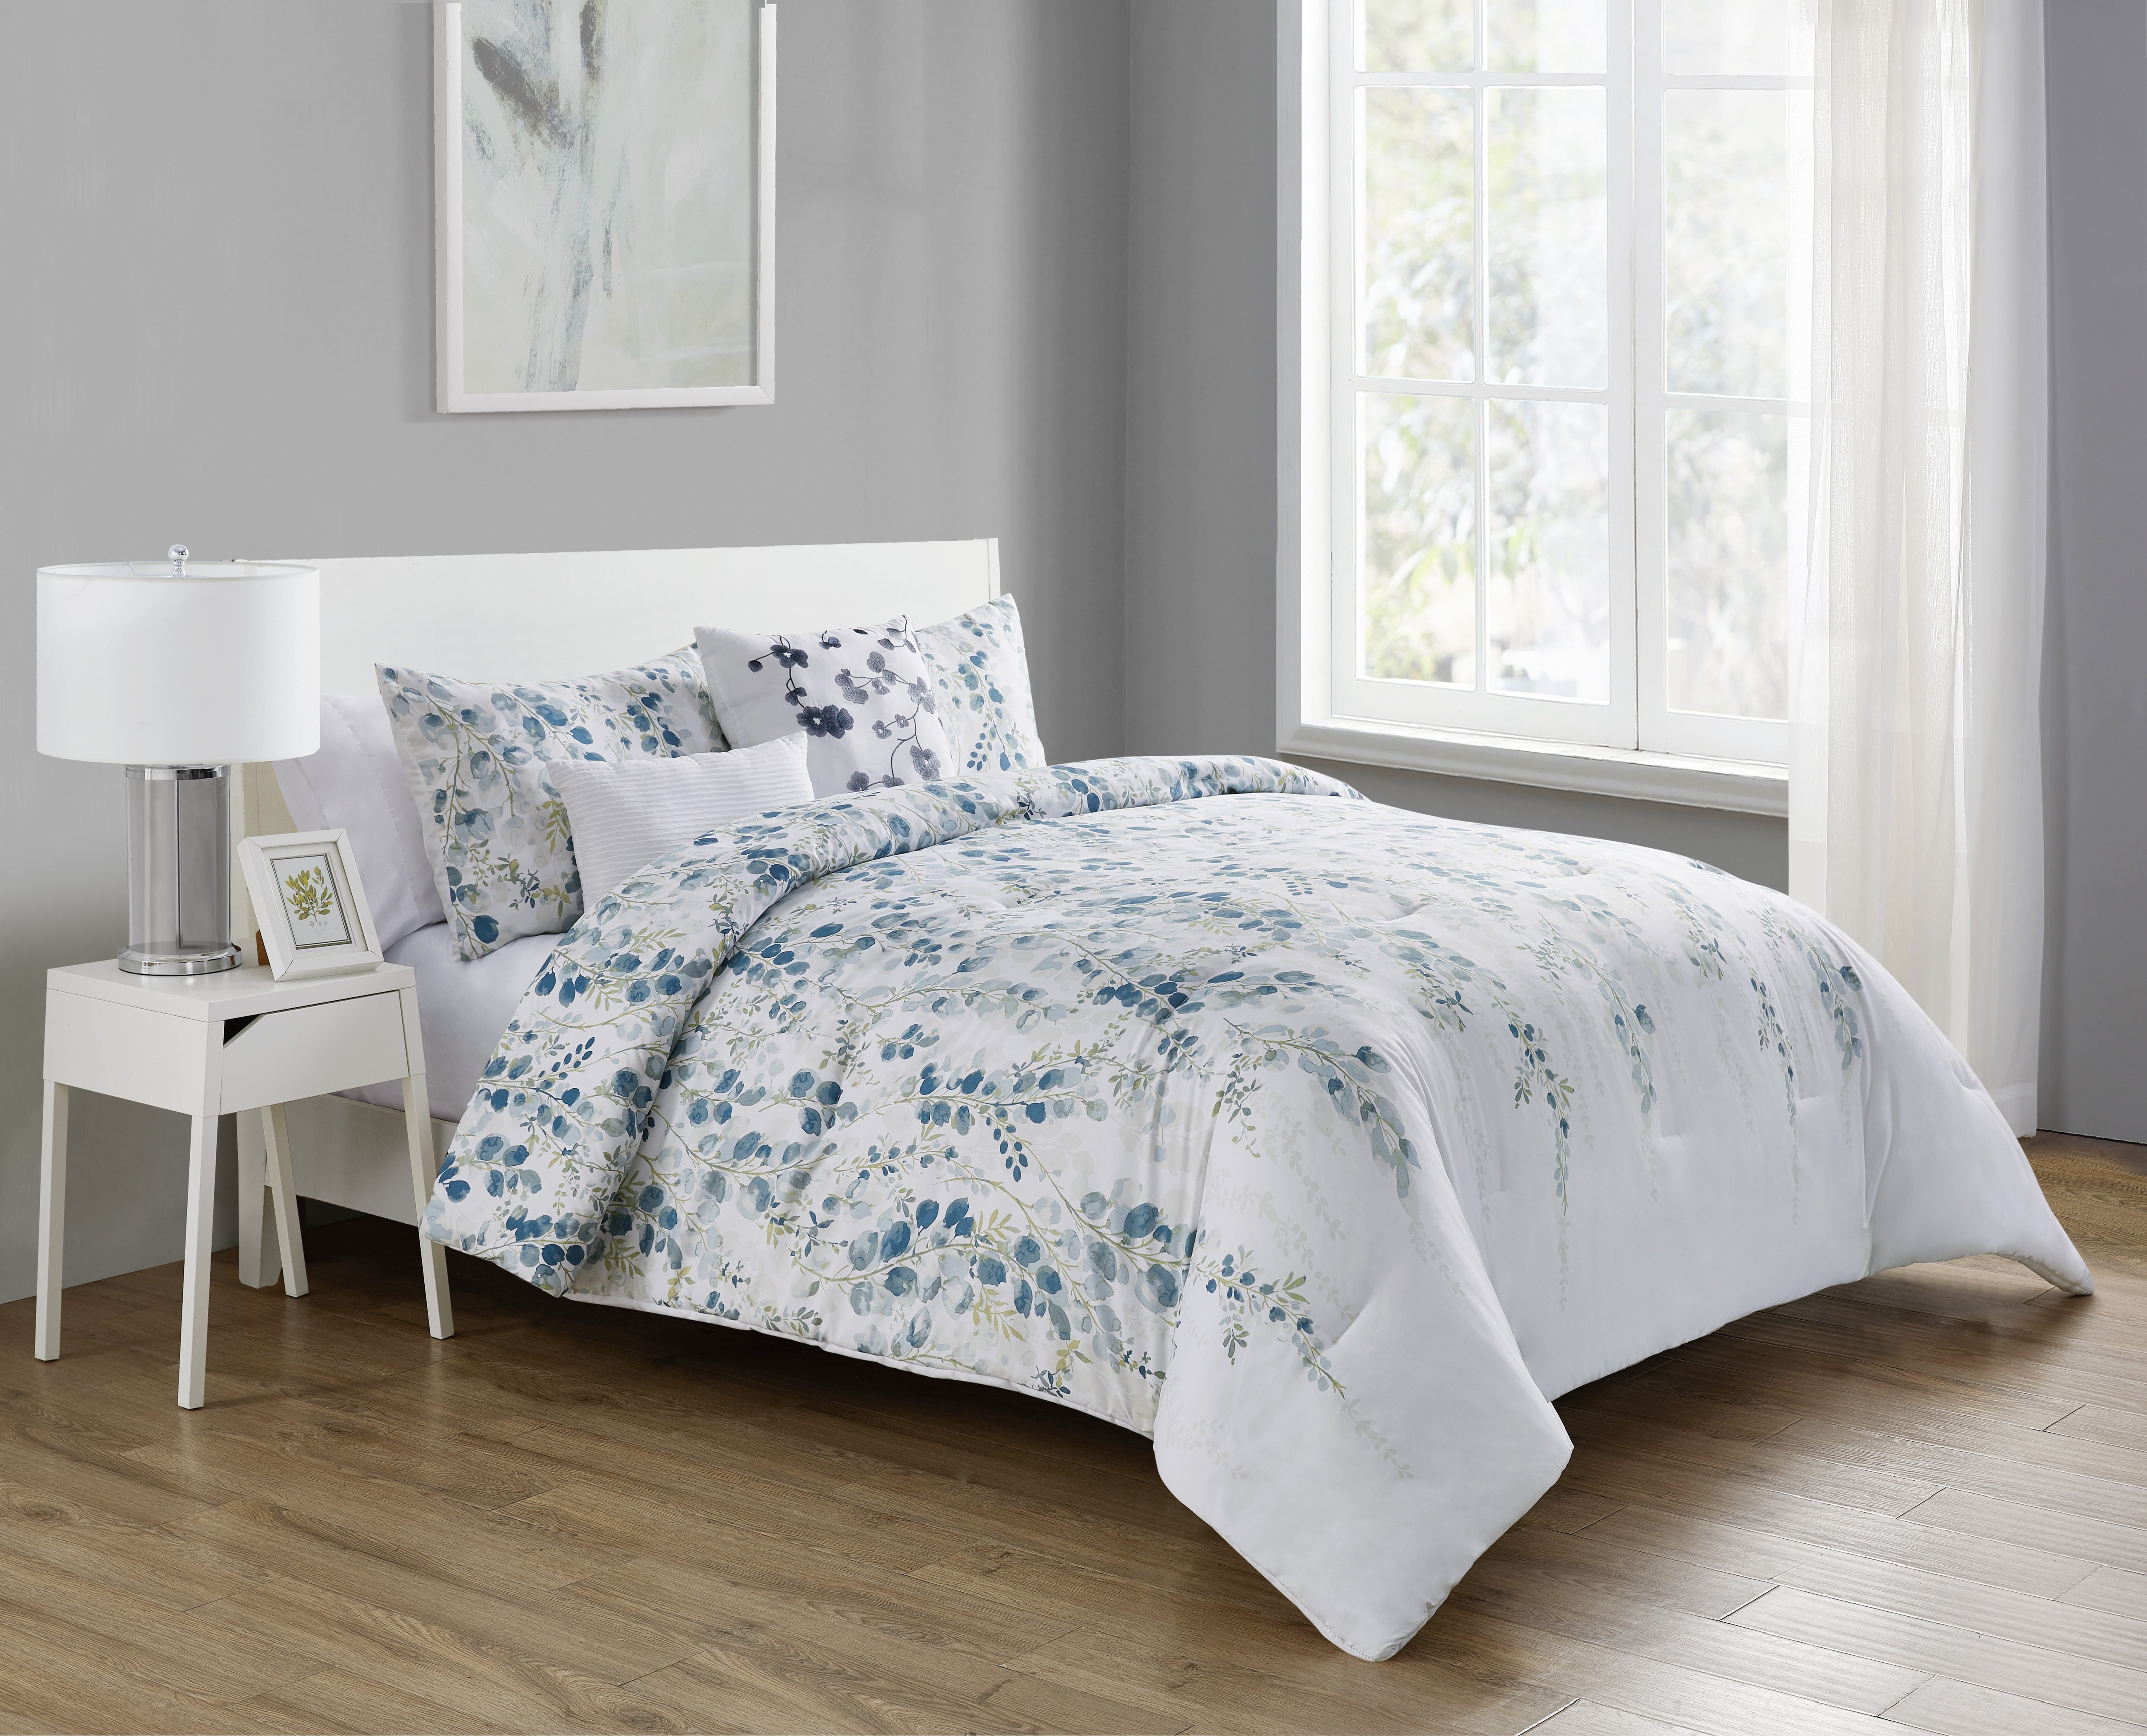 Vcny Home Hailey Blue And White Floral Comforter Set Full Queen Blue White Walmart Com Walmart Com